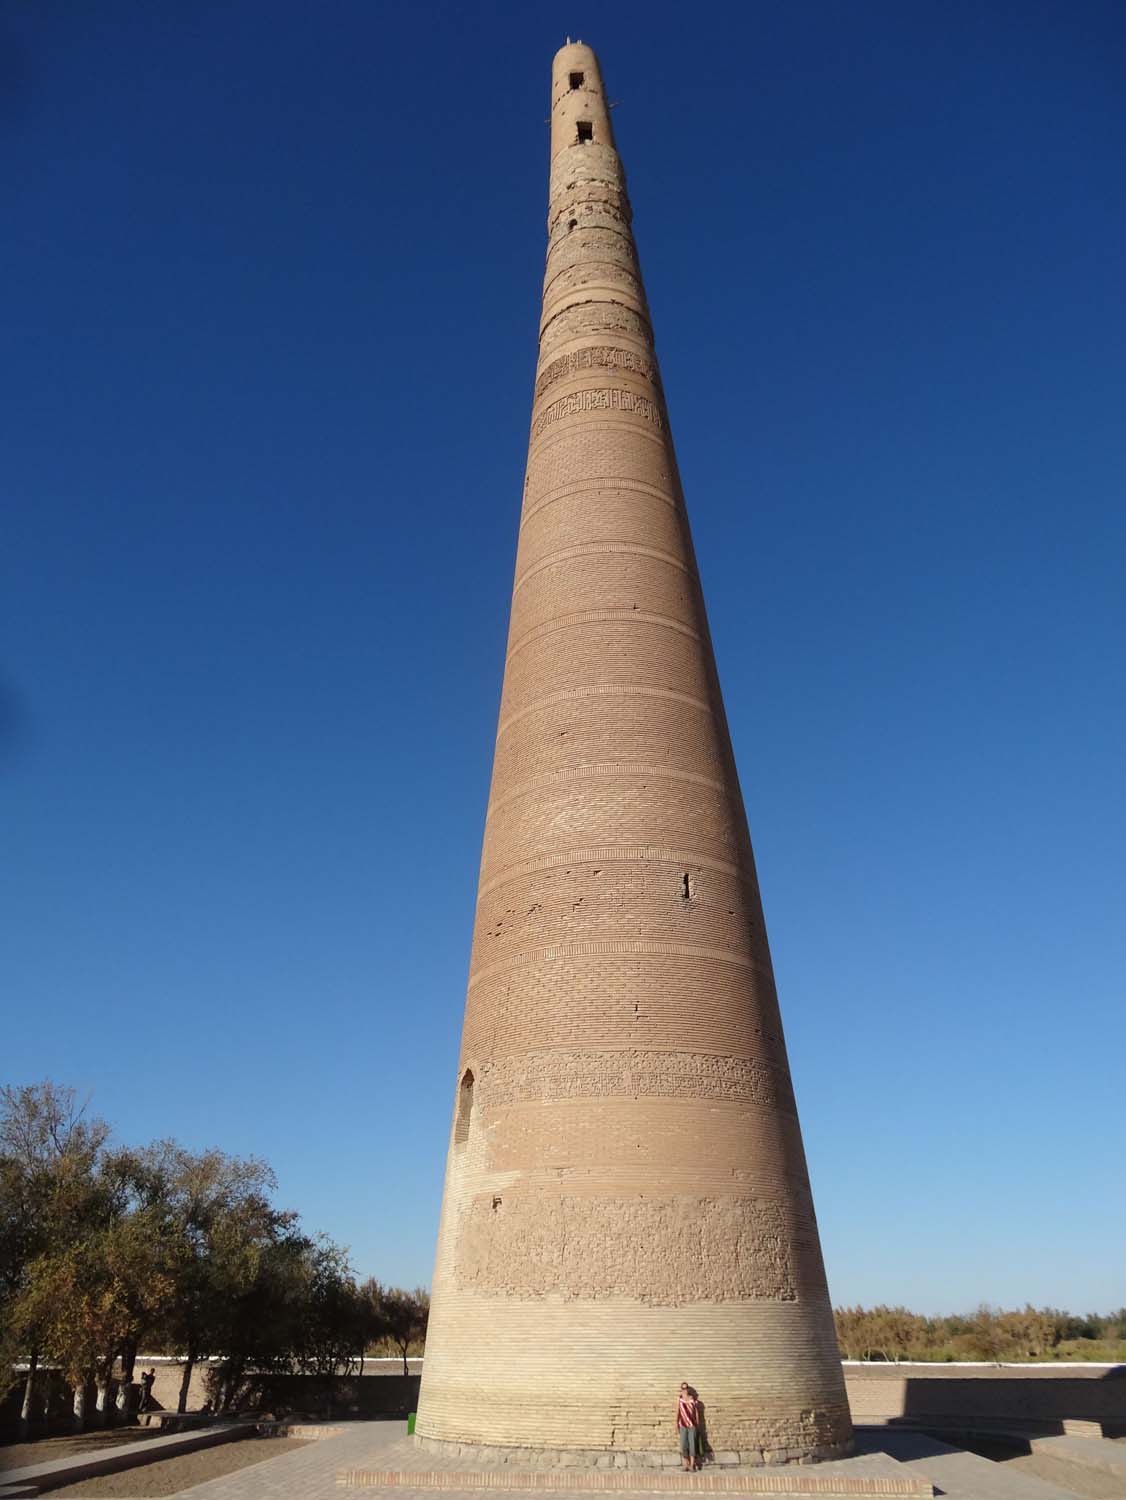 check out how wonky this 59m tall minaret is